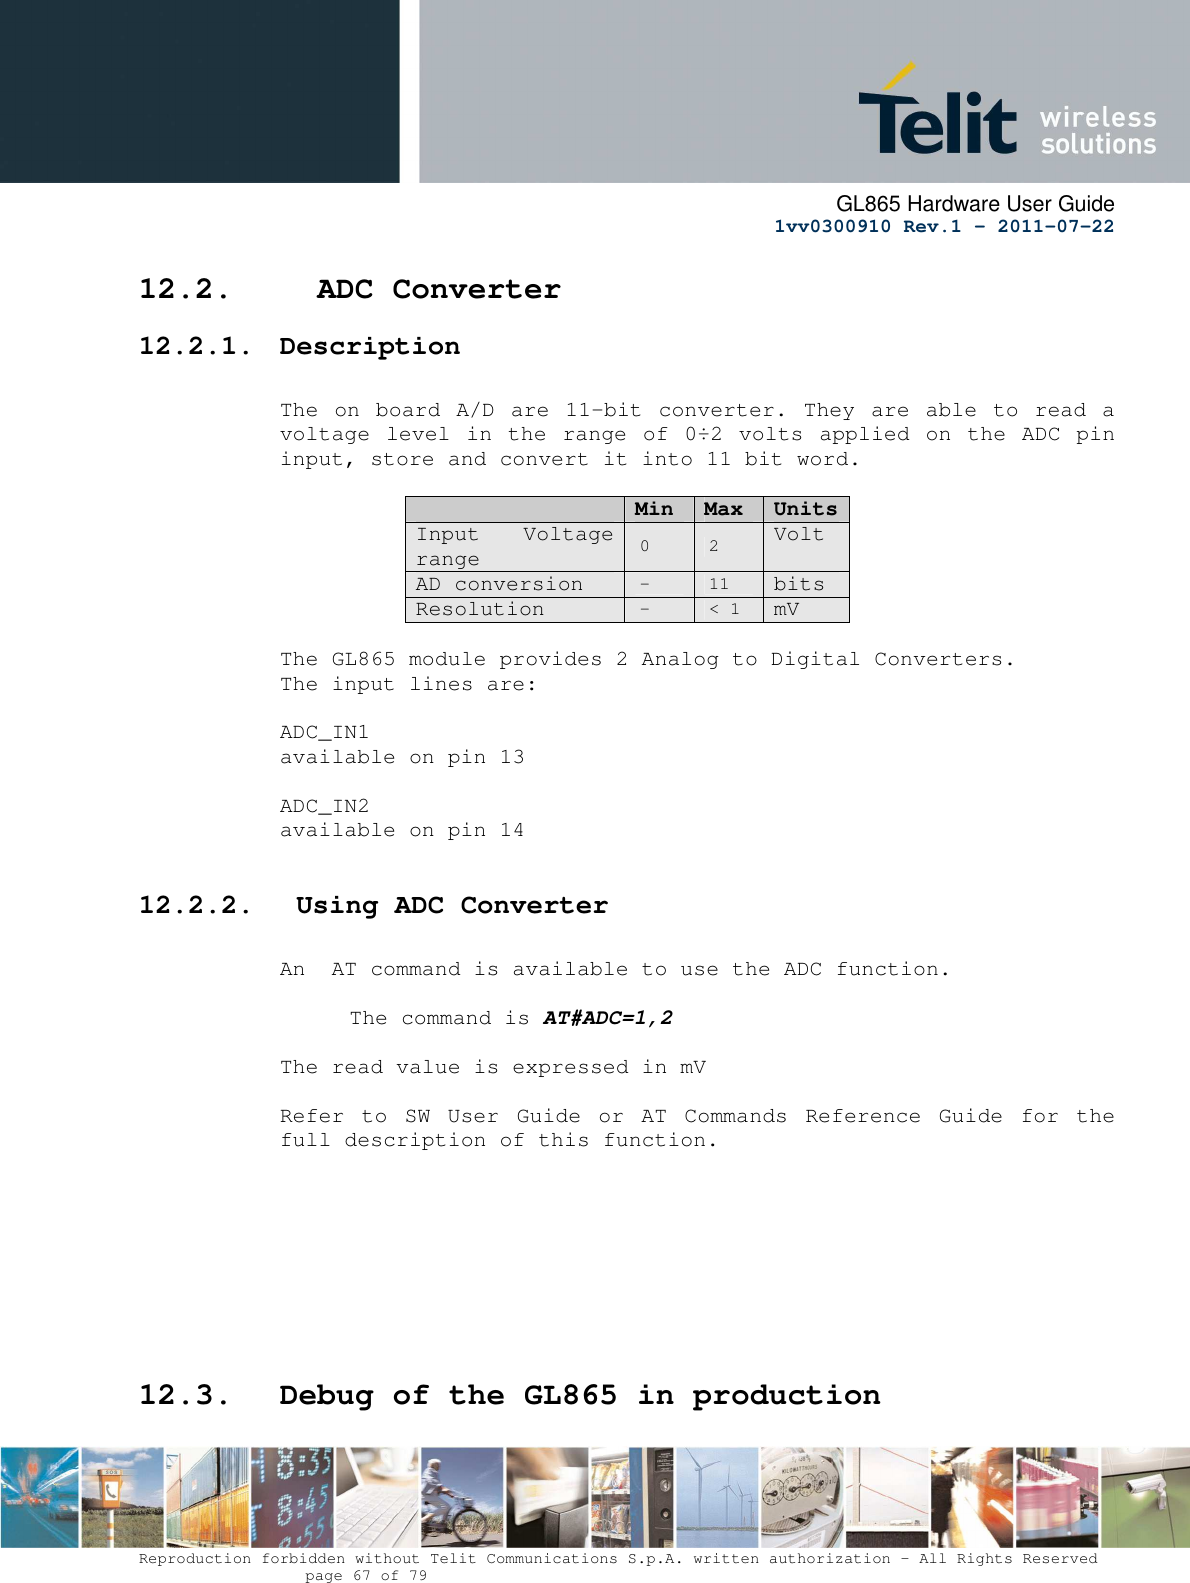      GL865 Hardware User Guide     1vv0300910 Rev.1 – 2011-07-22       Reproduction forbidden without Telit Communications S.p.A. written authorization - All Rights Reserved    page 67 of 79  12.2.   ADC Converter 12.2.1. Description  The on  board  A/D are  11-bit converter. They  are able to  read a voltage level  in the range of 0÷2 volts applied  on the ADC pin input, store and convert it into 11 bit word.    Min  Max  Units Input  Voltage range 0  2 Volt AD conversion -  11 bits Resolution -  &lt; 1 mV  The GL865 module provides 2 Analog to Digital Converters.  The input lines are:  ADC_IN1   available on pin 13   ADC_IN2   available on pin 14  12.2.2.  Using ADC Converter  An  AT command is available to use the ADC function.  The command is AT#ADC=1,2  The read value is expressed in mV  Refer  to  SW  User  Guide  or  AT  Commands  Reference  Guide  for  the full description of this function.          12.3. Debug of the GL865 in production  